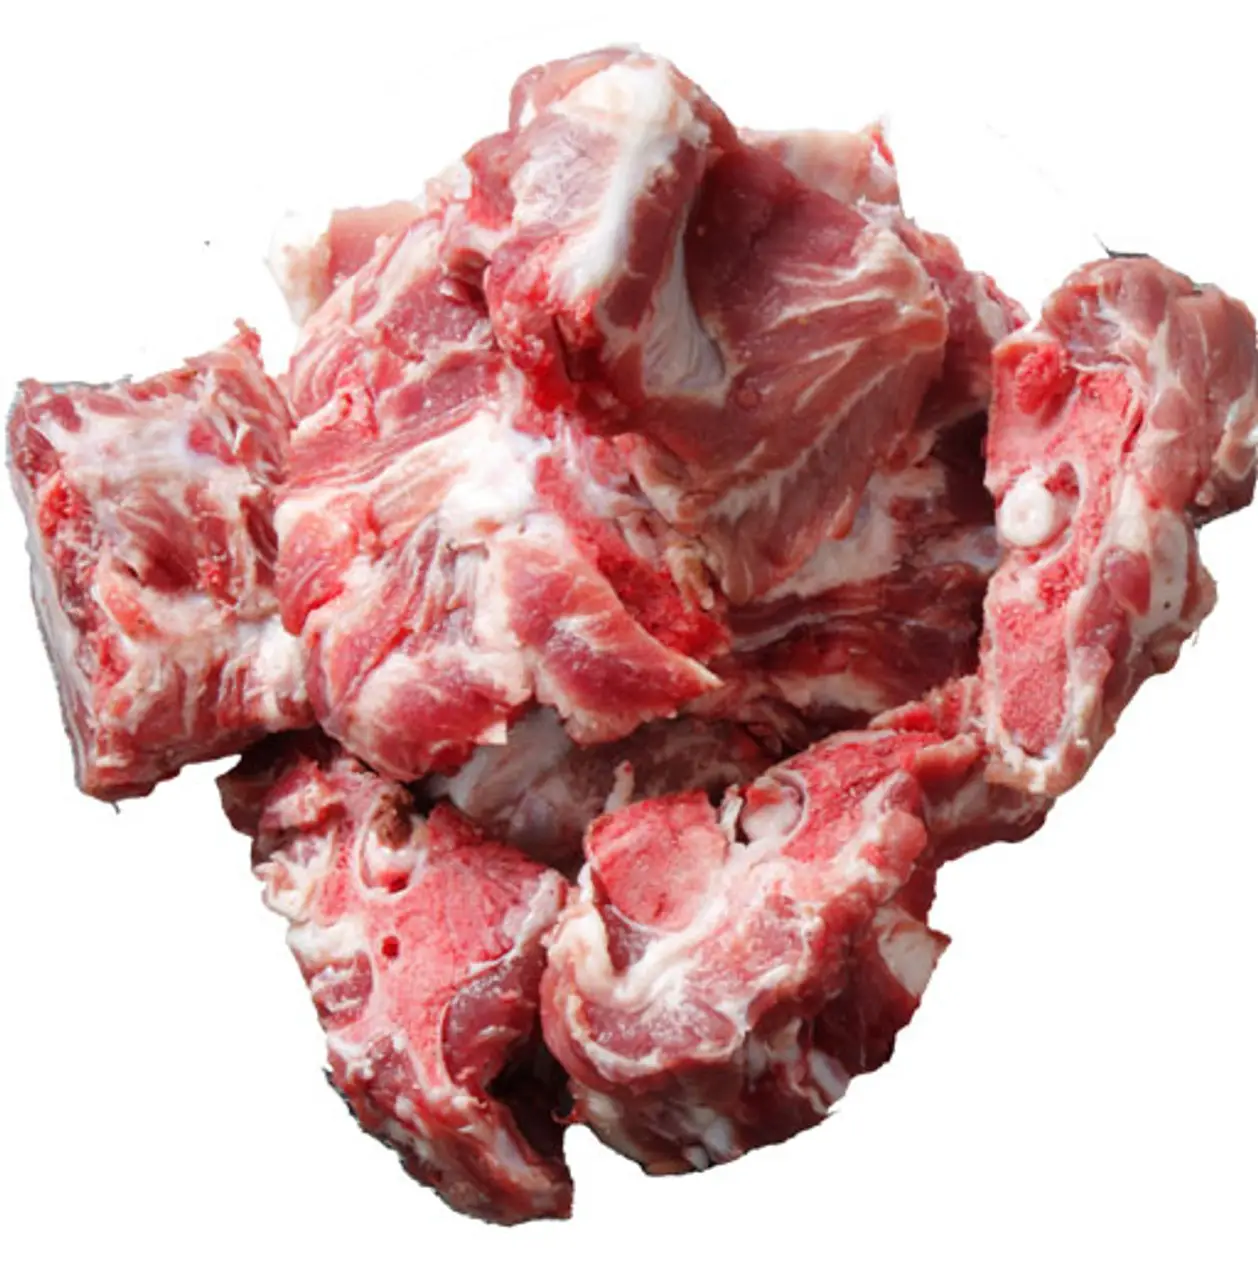 France Rare Pork Throat Cartilage Food Products Dry Meat